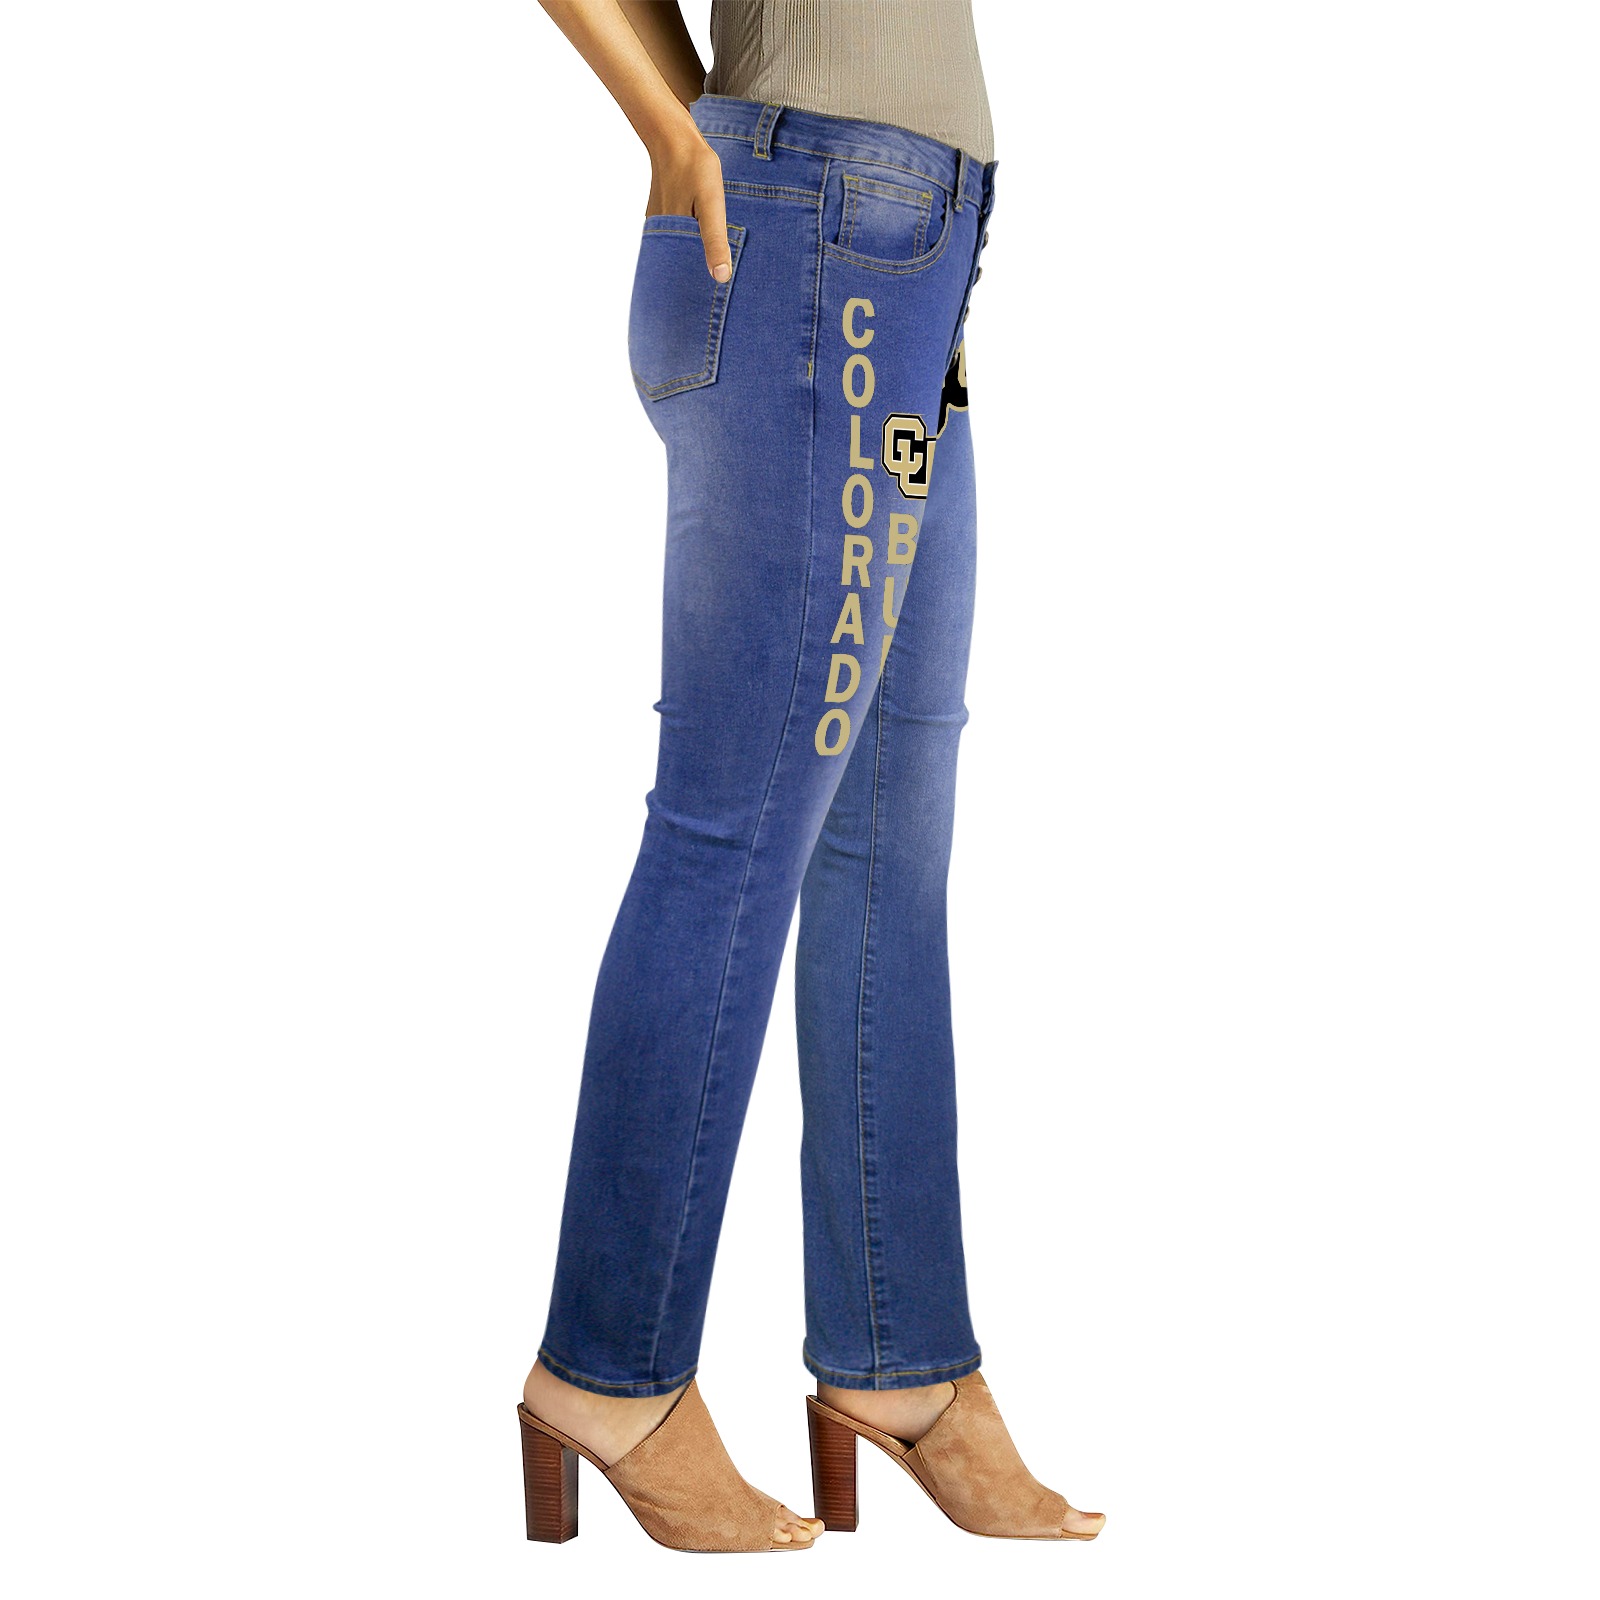 CU Buffs Women's Jeans (Front&Back Printing)